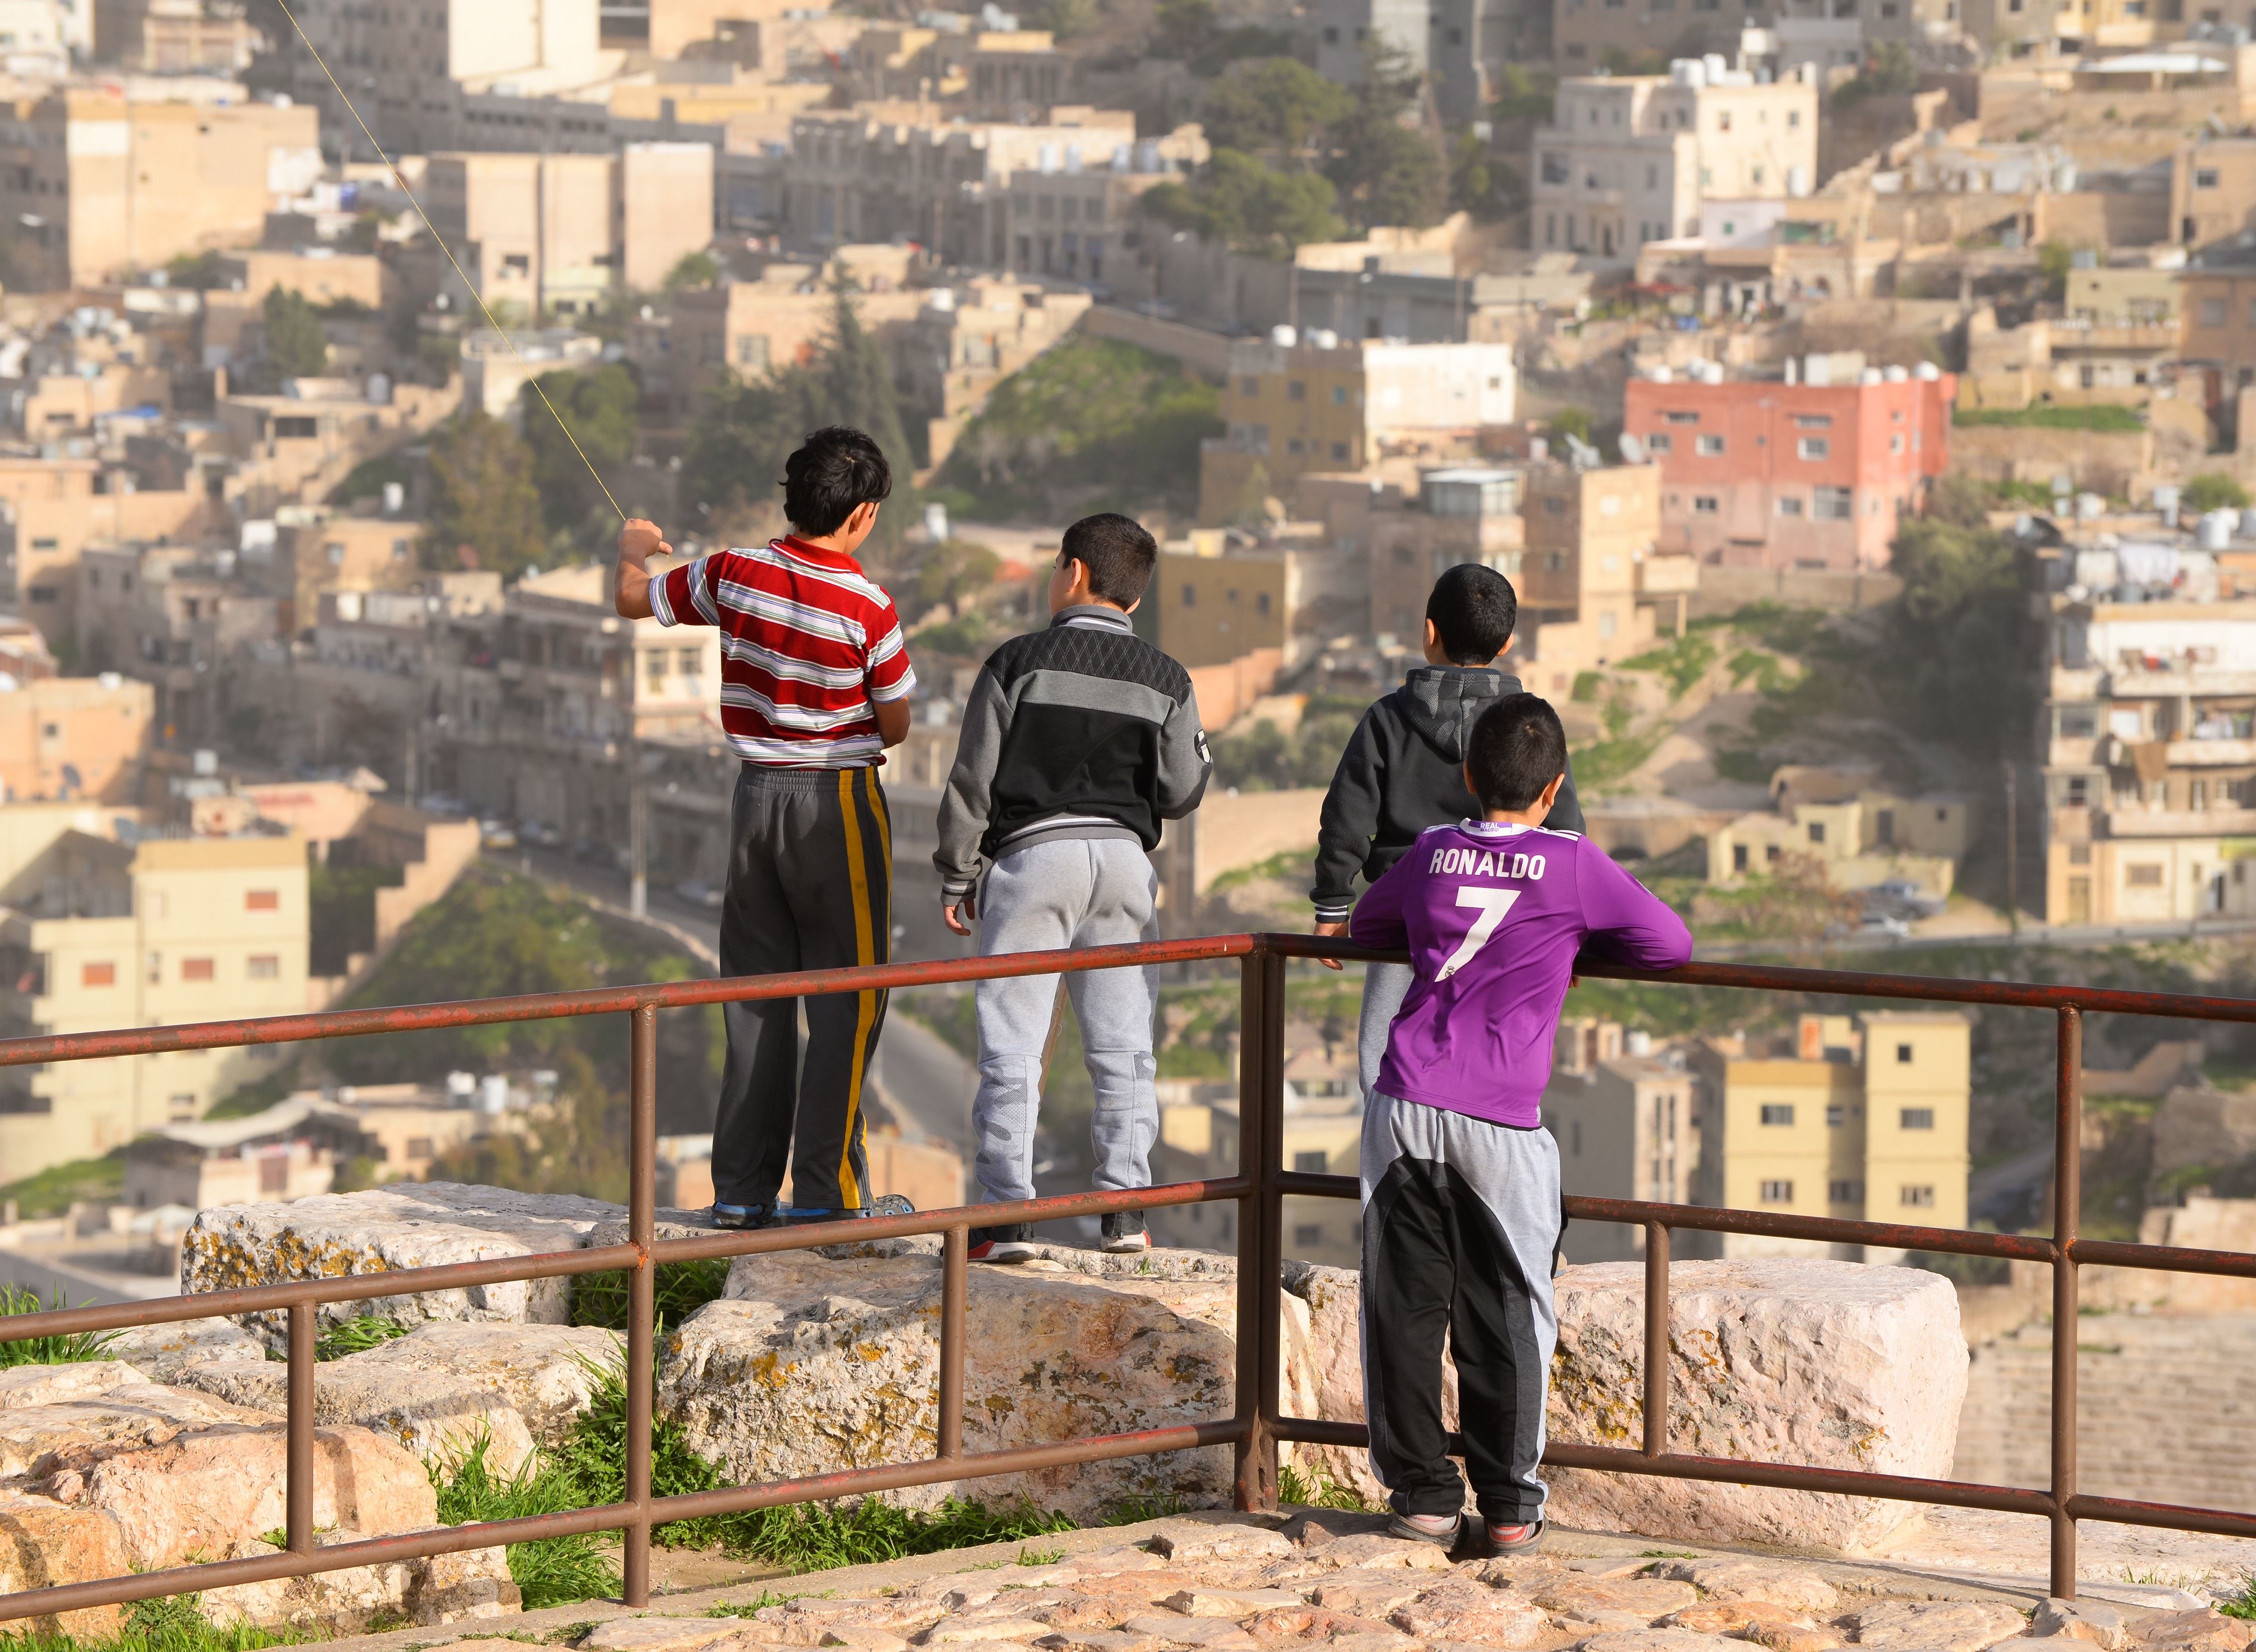 Group of local Jordanian children and city skyline out of focus from the Citadel Hill, Jabal. Image by Thiago B Trevisan / Shutterstock.com. Jordan, 2018.
